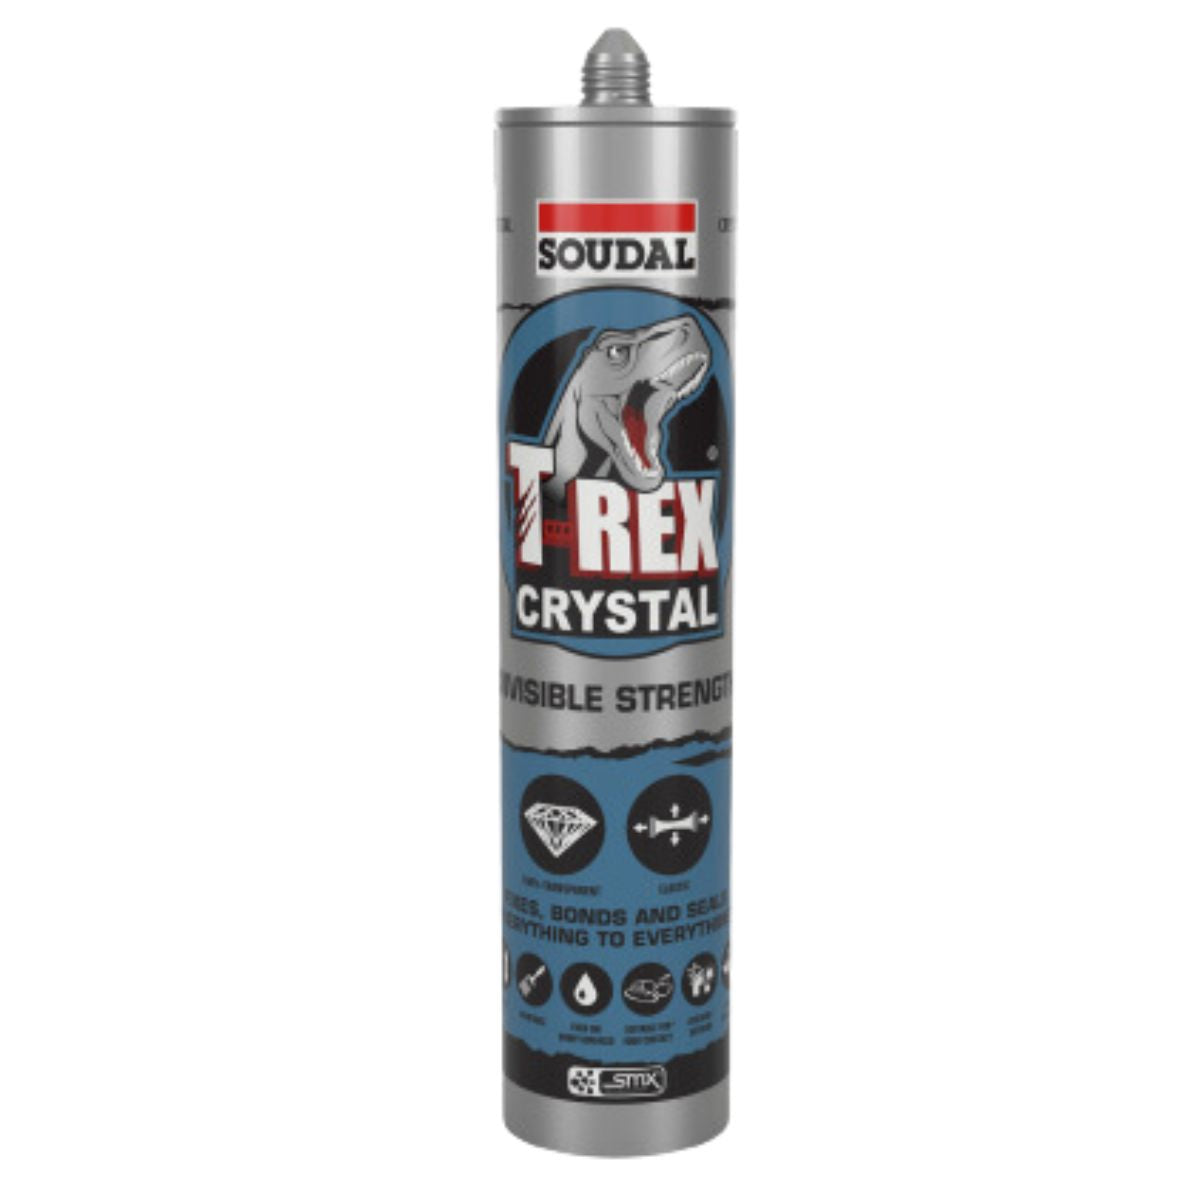 Soudal 121969 T-Rex Power 290ml SMX® Polymer Sealant Adhesive Clear Crystal - South East Clearance Centre